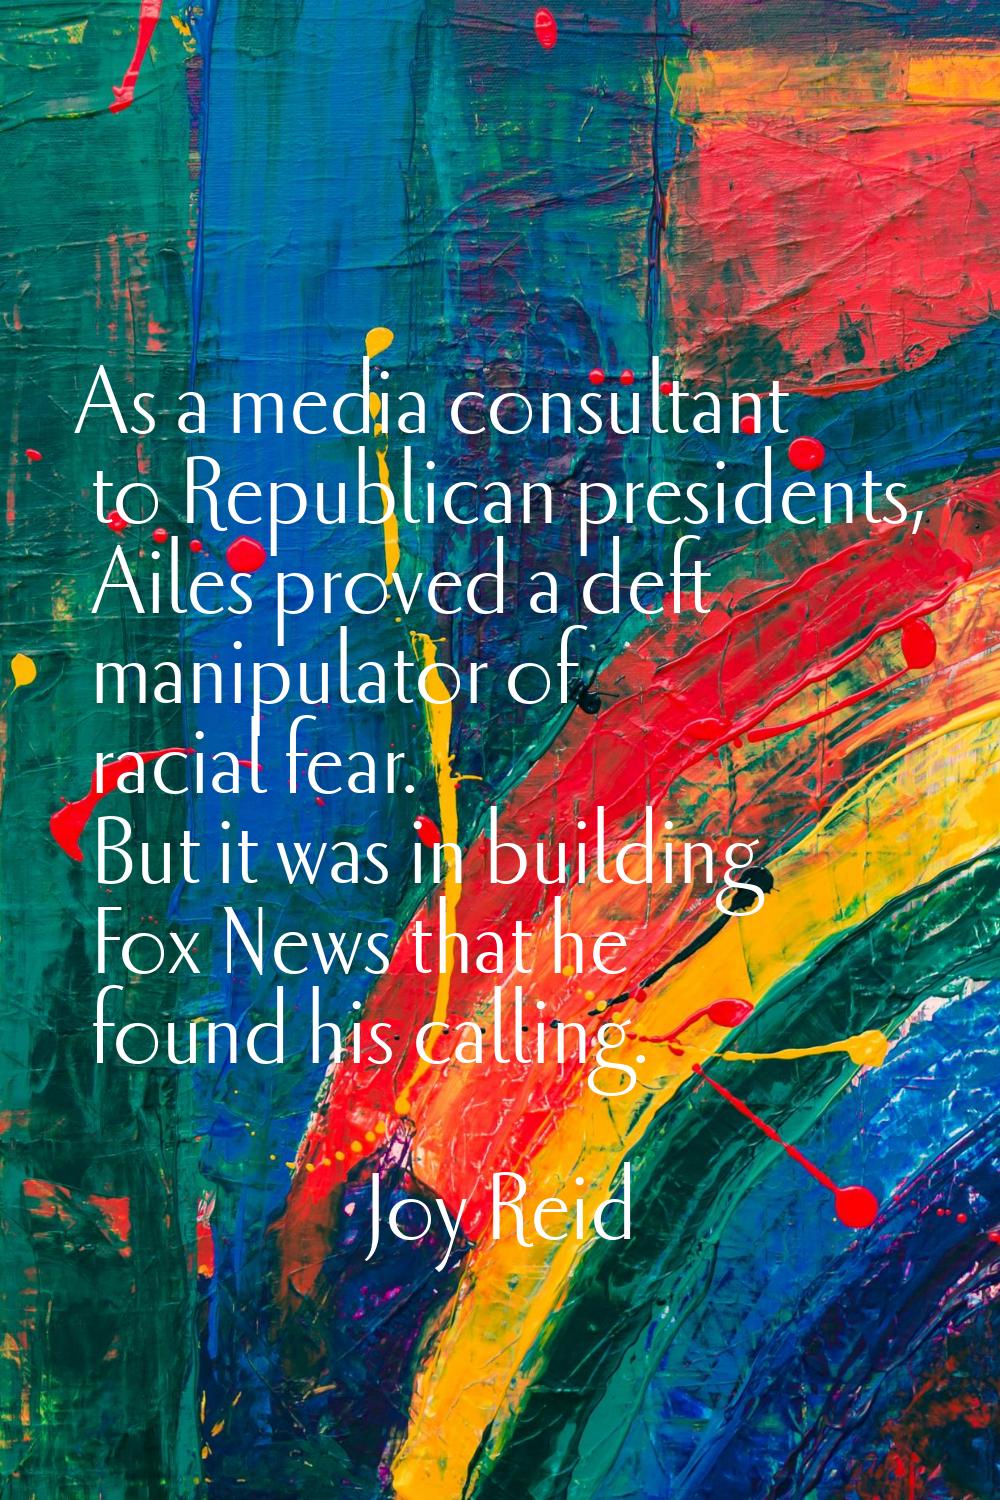 As a media consultant to Republican presidents, Ailes proved a deft manipulator of racial fear. But